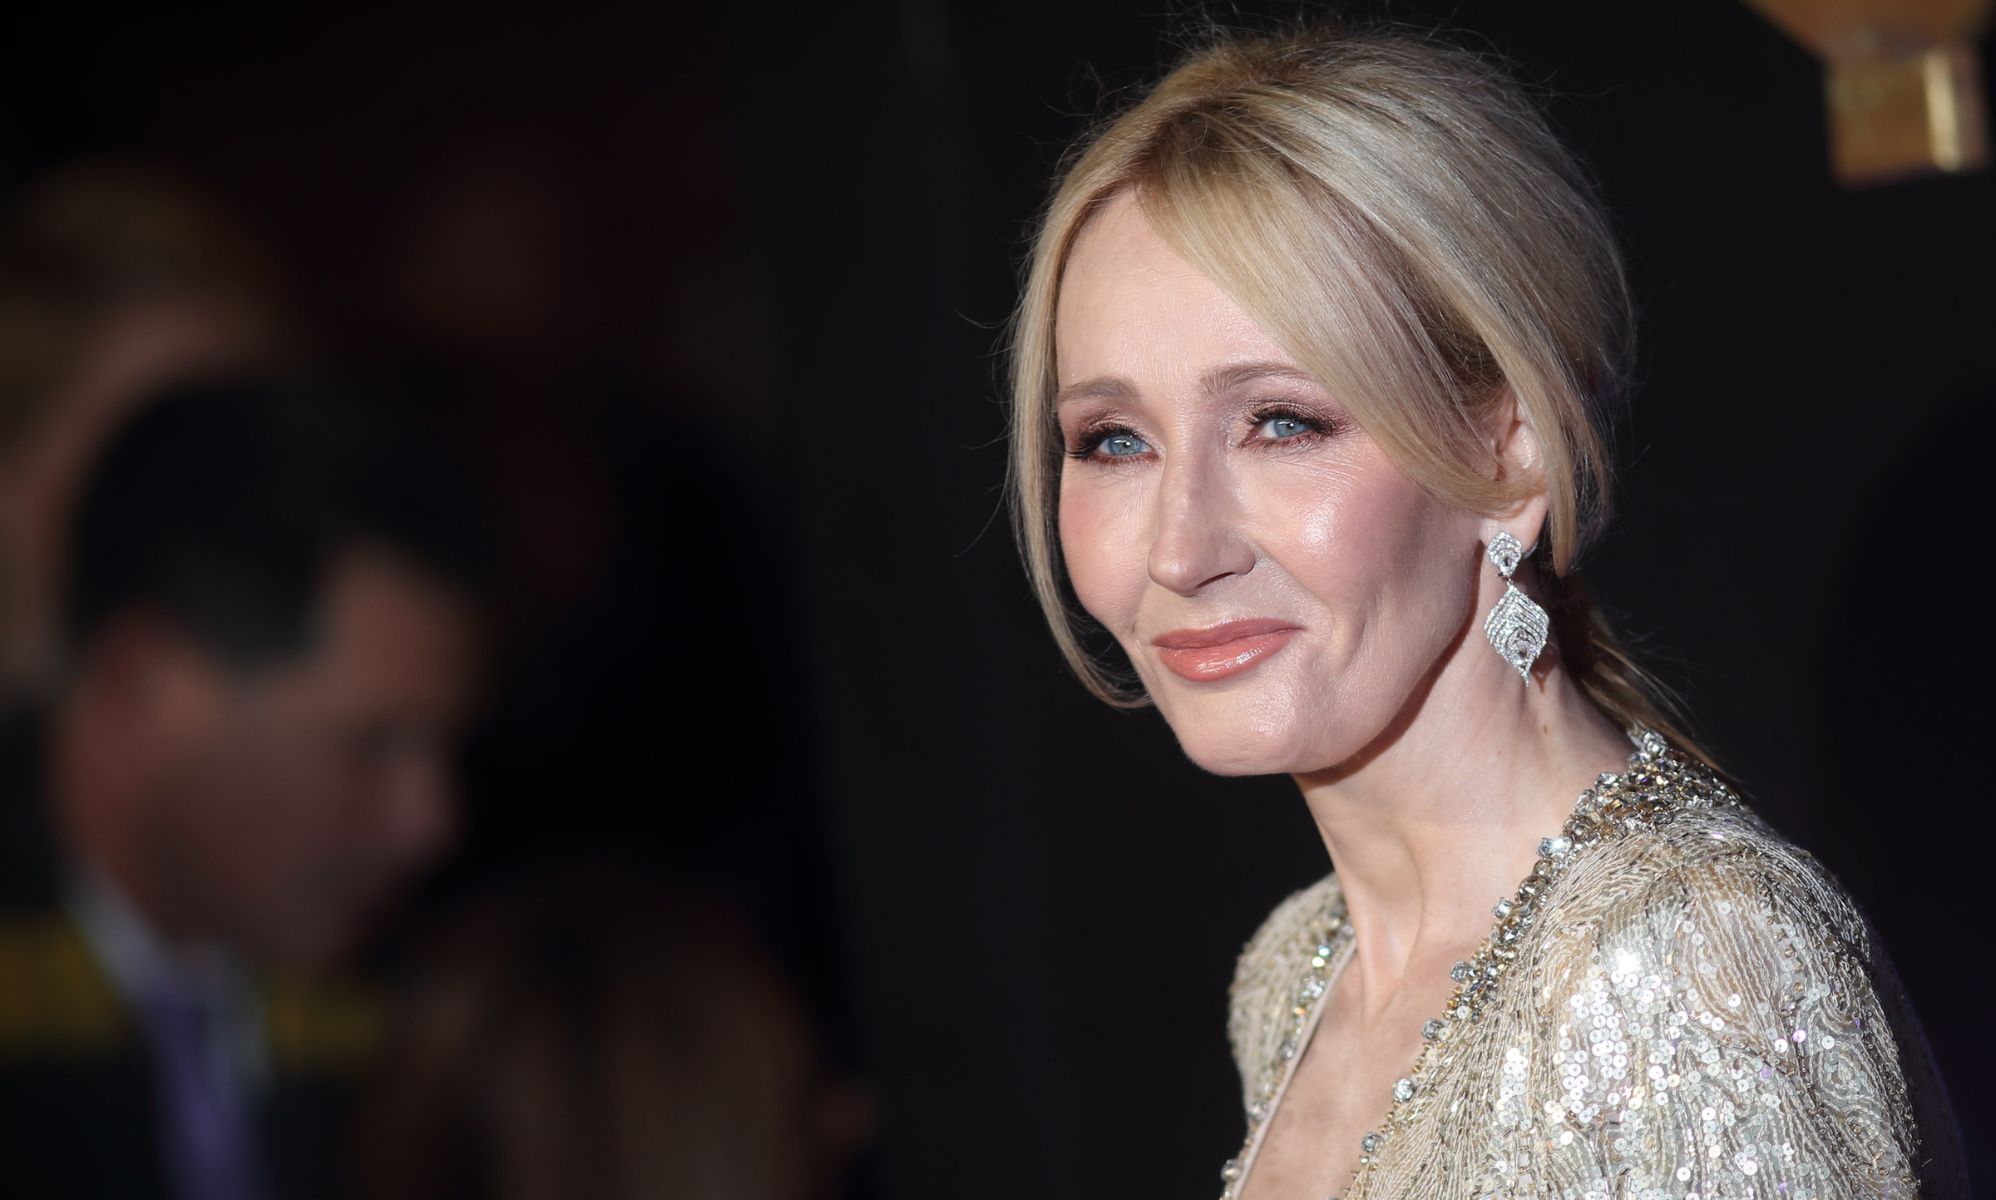 JK Rowling claims gender dysphoria can be ‘cured’ through puberty